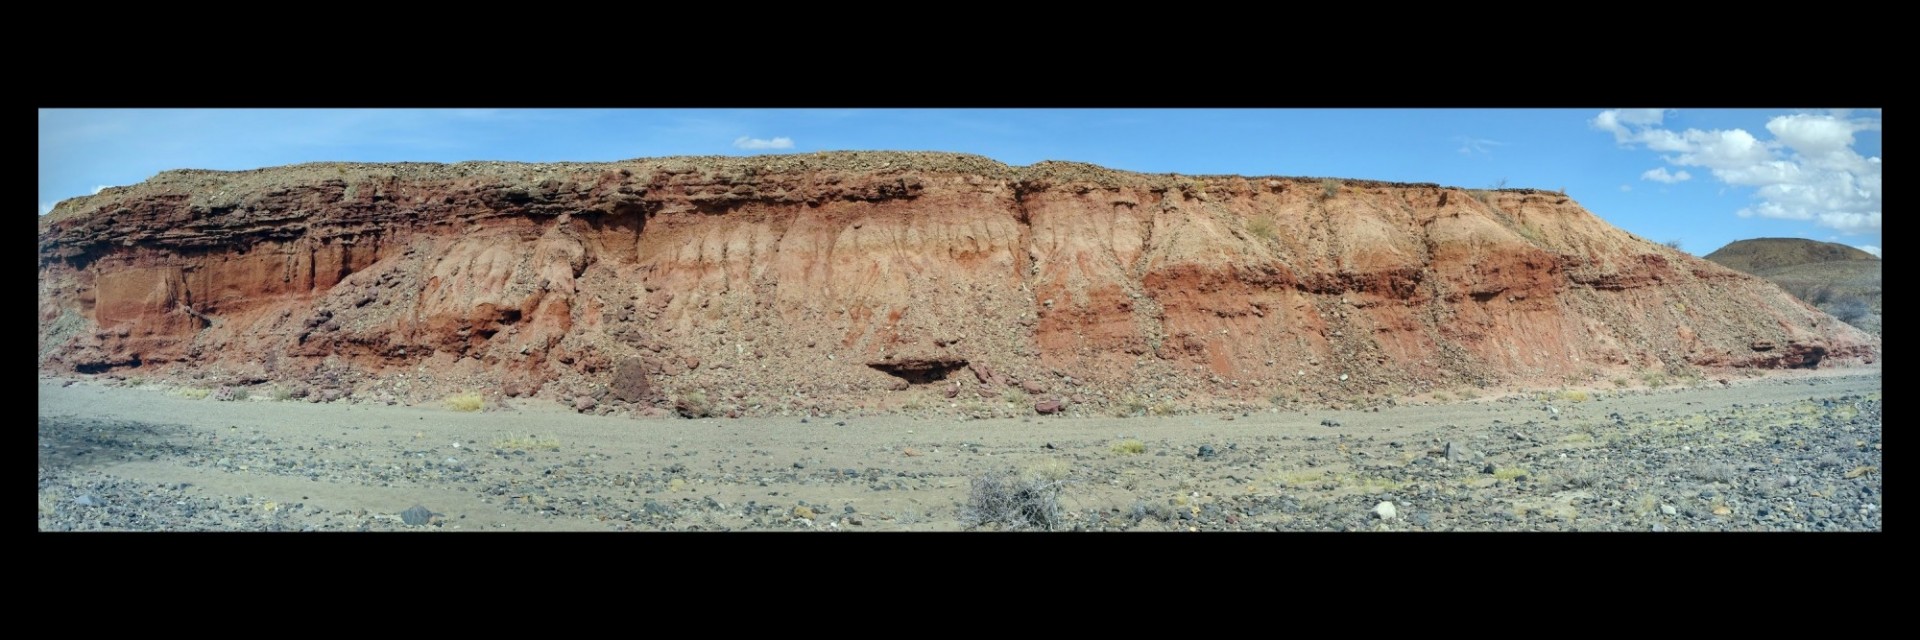 A thick deposit of sediments in the Turkana Basin